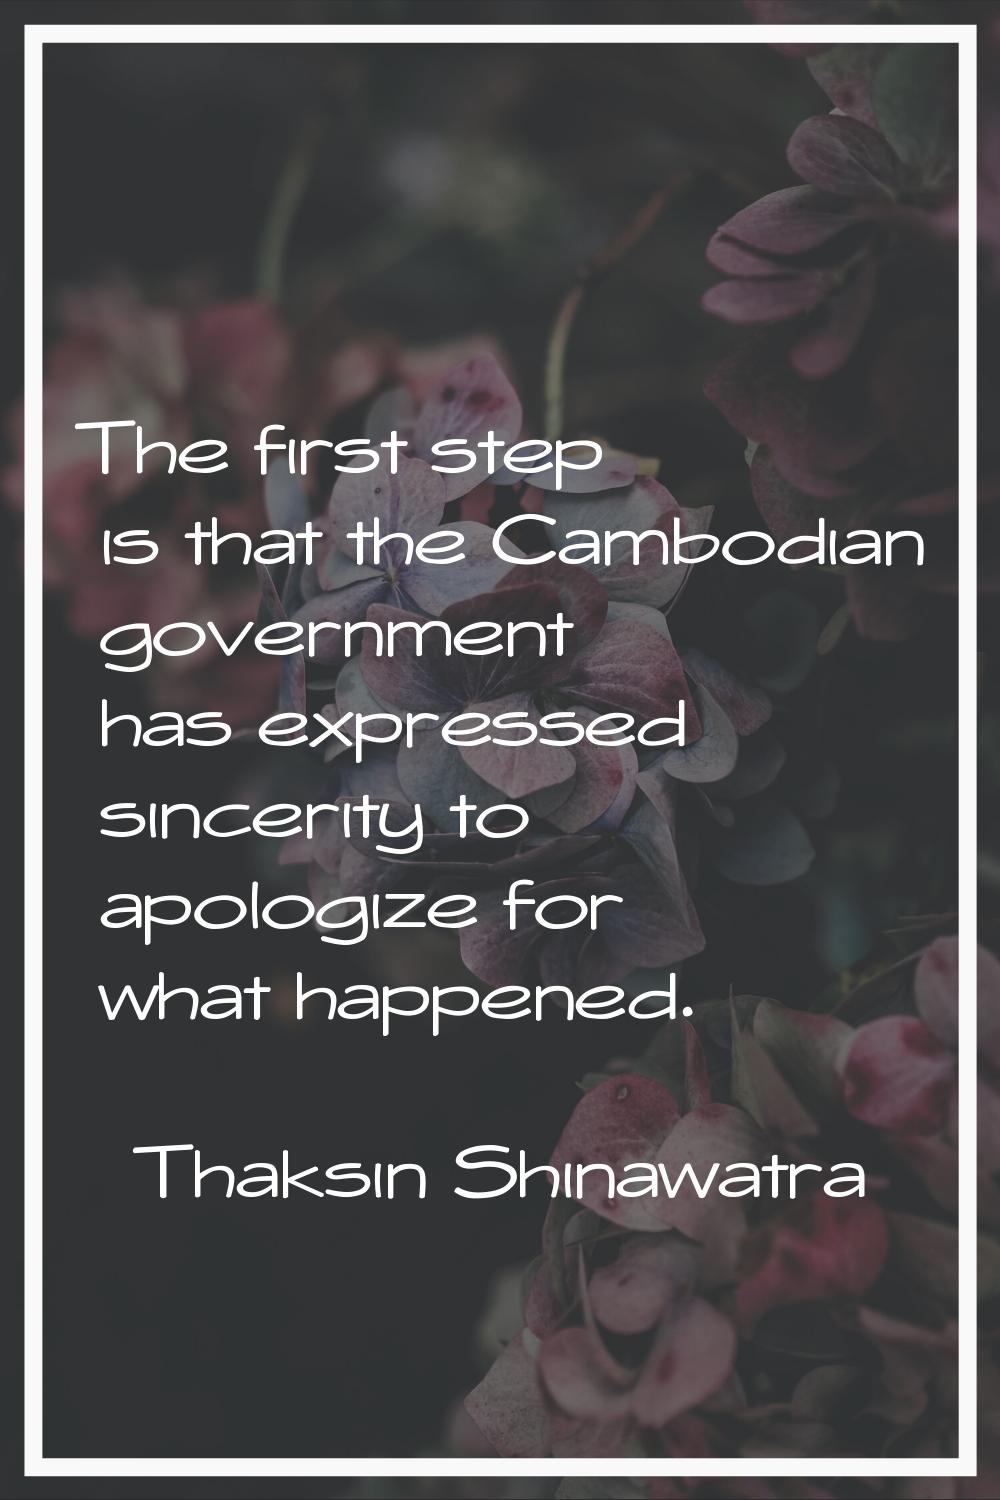 The first step is that the Cambodian government has expressed sincerity to apologize for what happe